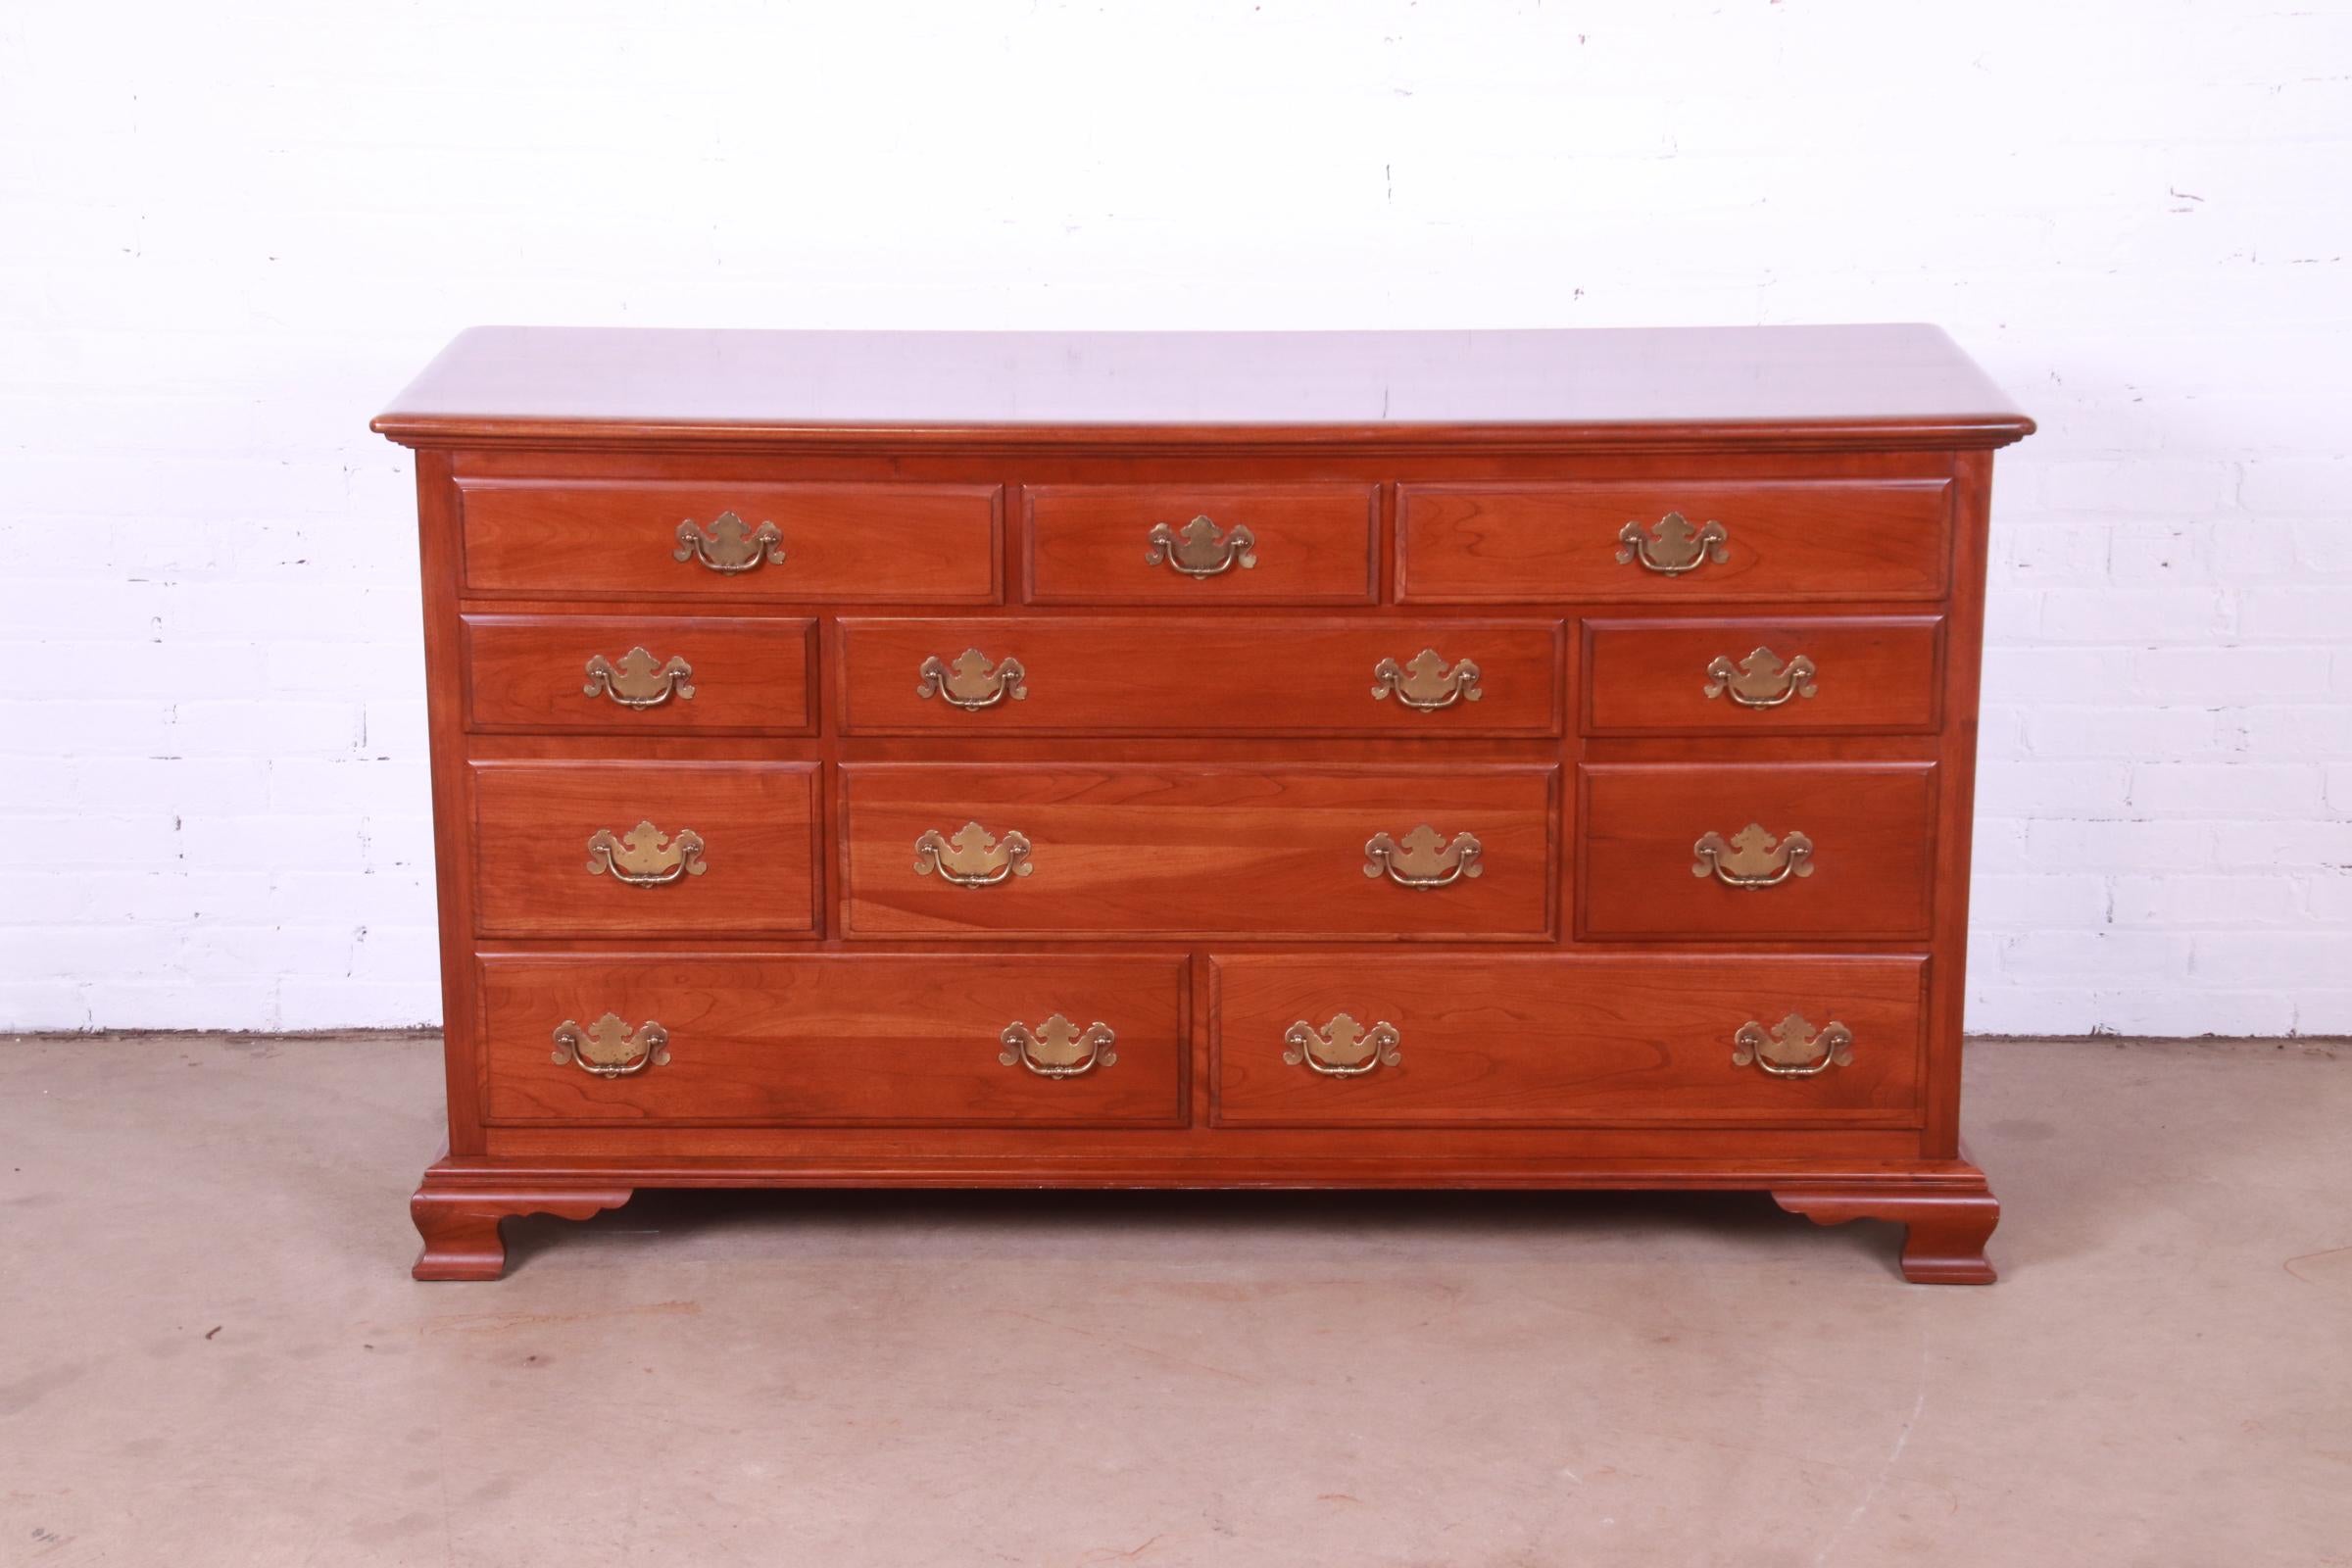 A gorgeous American Colonial or Chippendale style eleven-drawer dresser or chest of drawers

By Ethan Allen, 